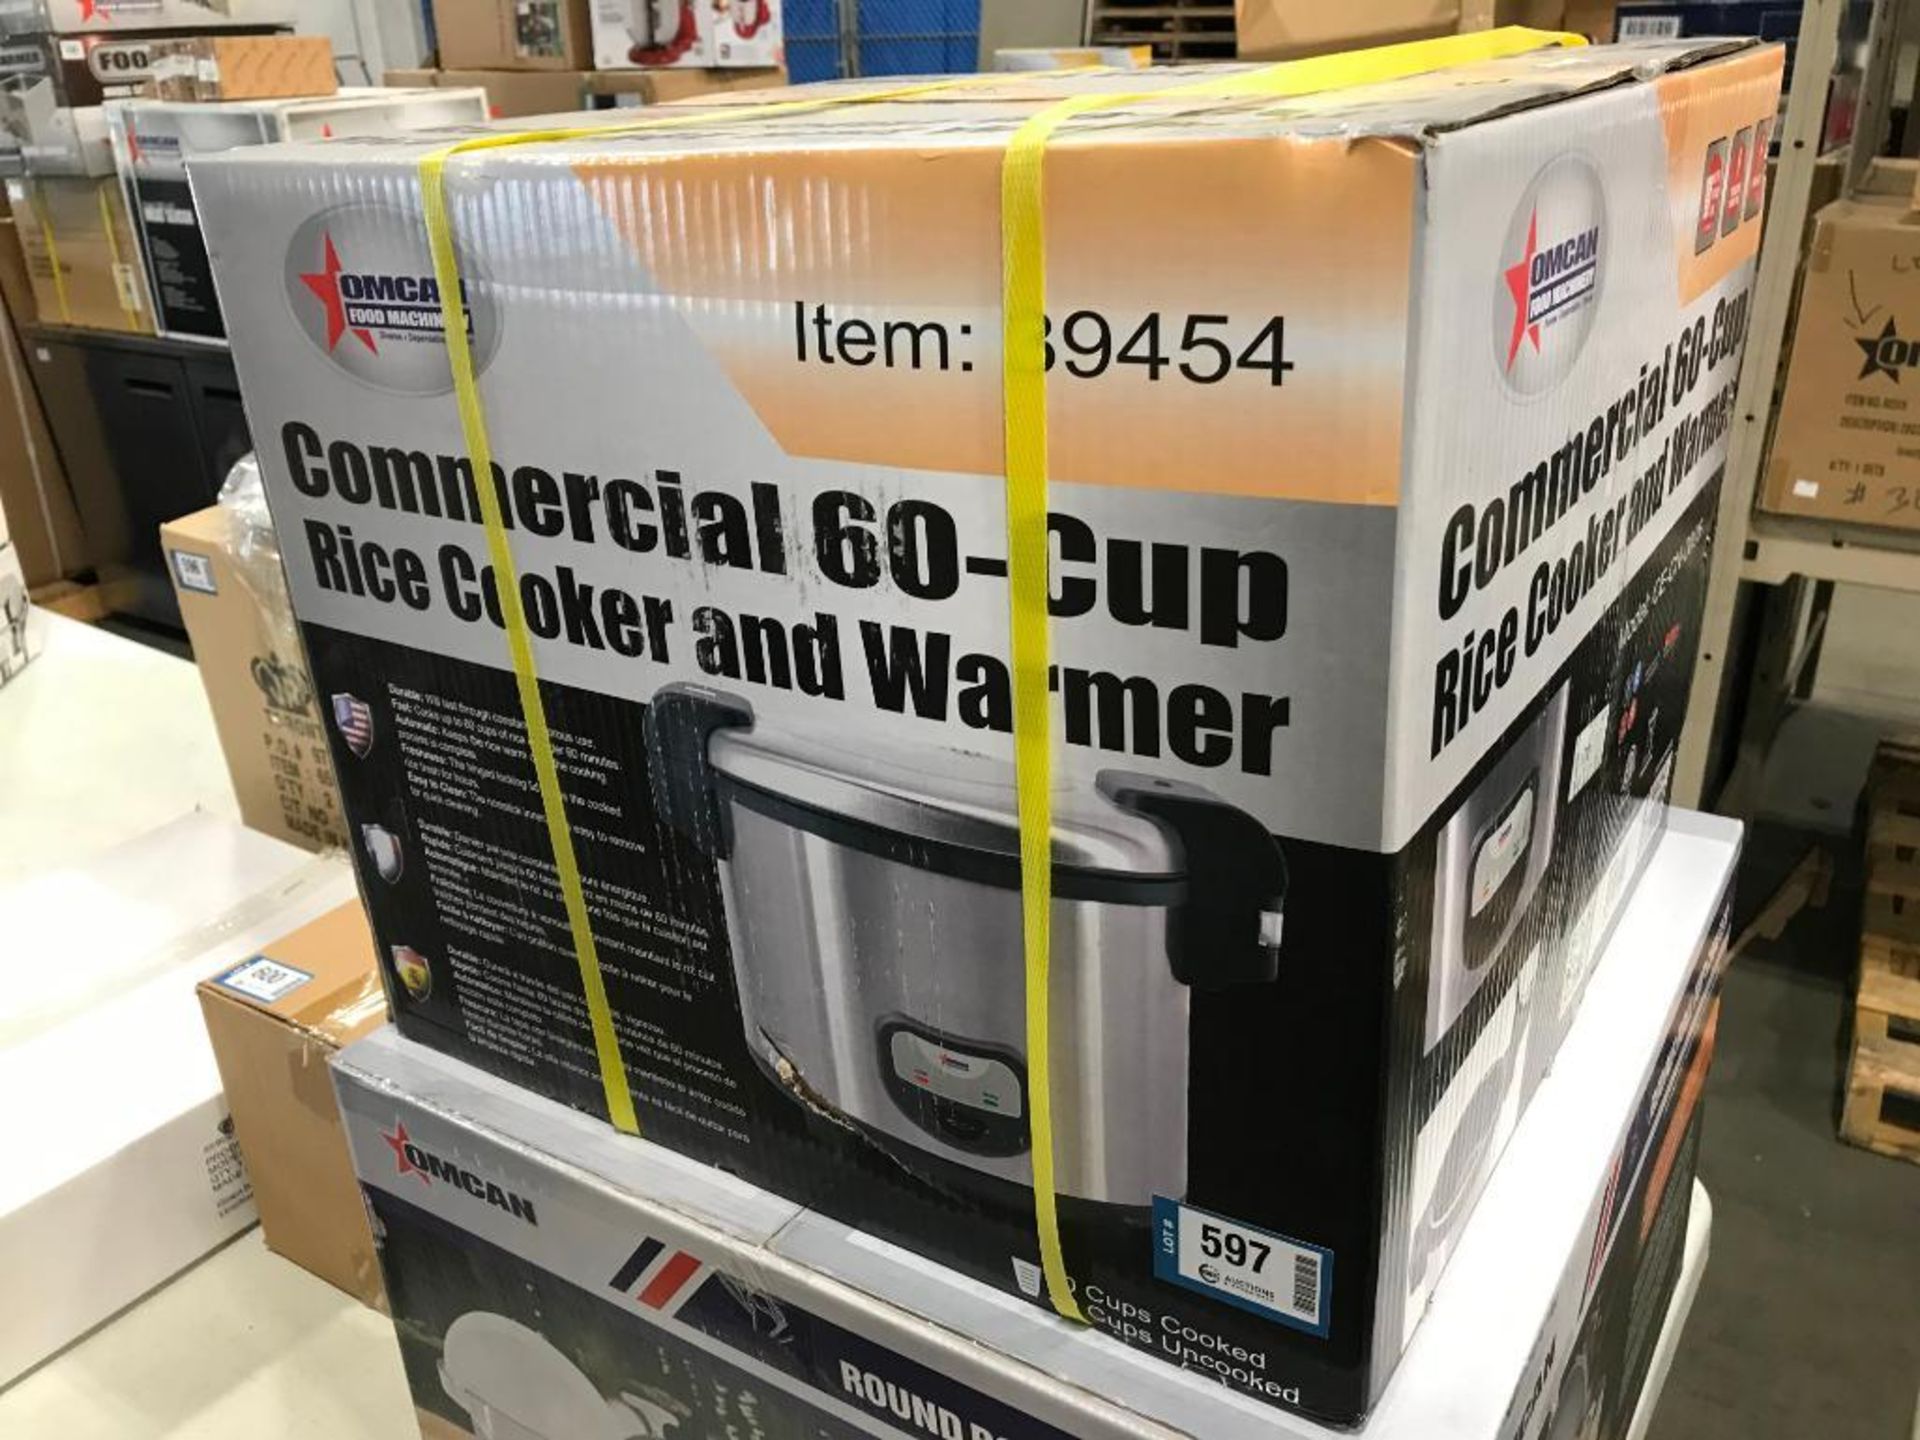 60 CUP COMMERCIAL RICE COOKER/WARMER, OMCAN 39454 - NEW - Image 5 of 5